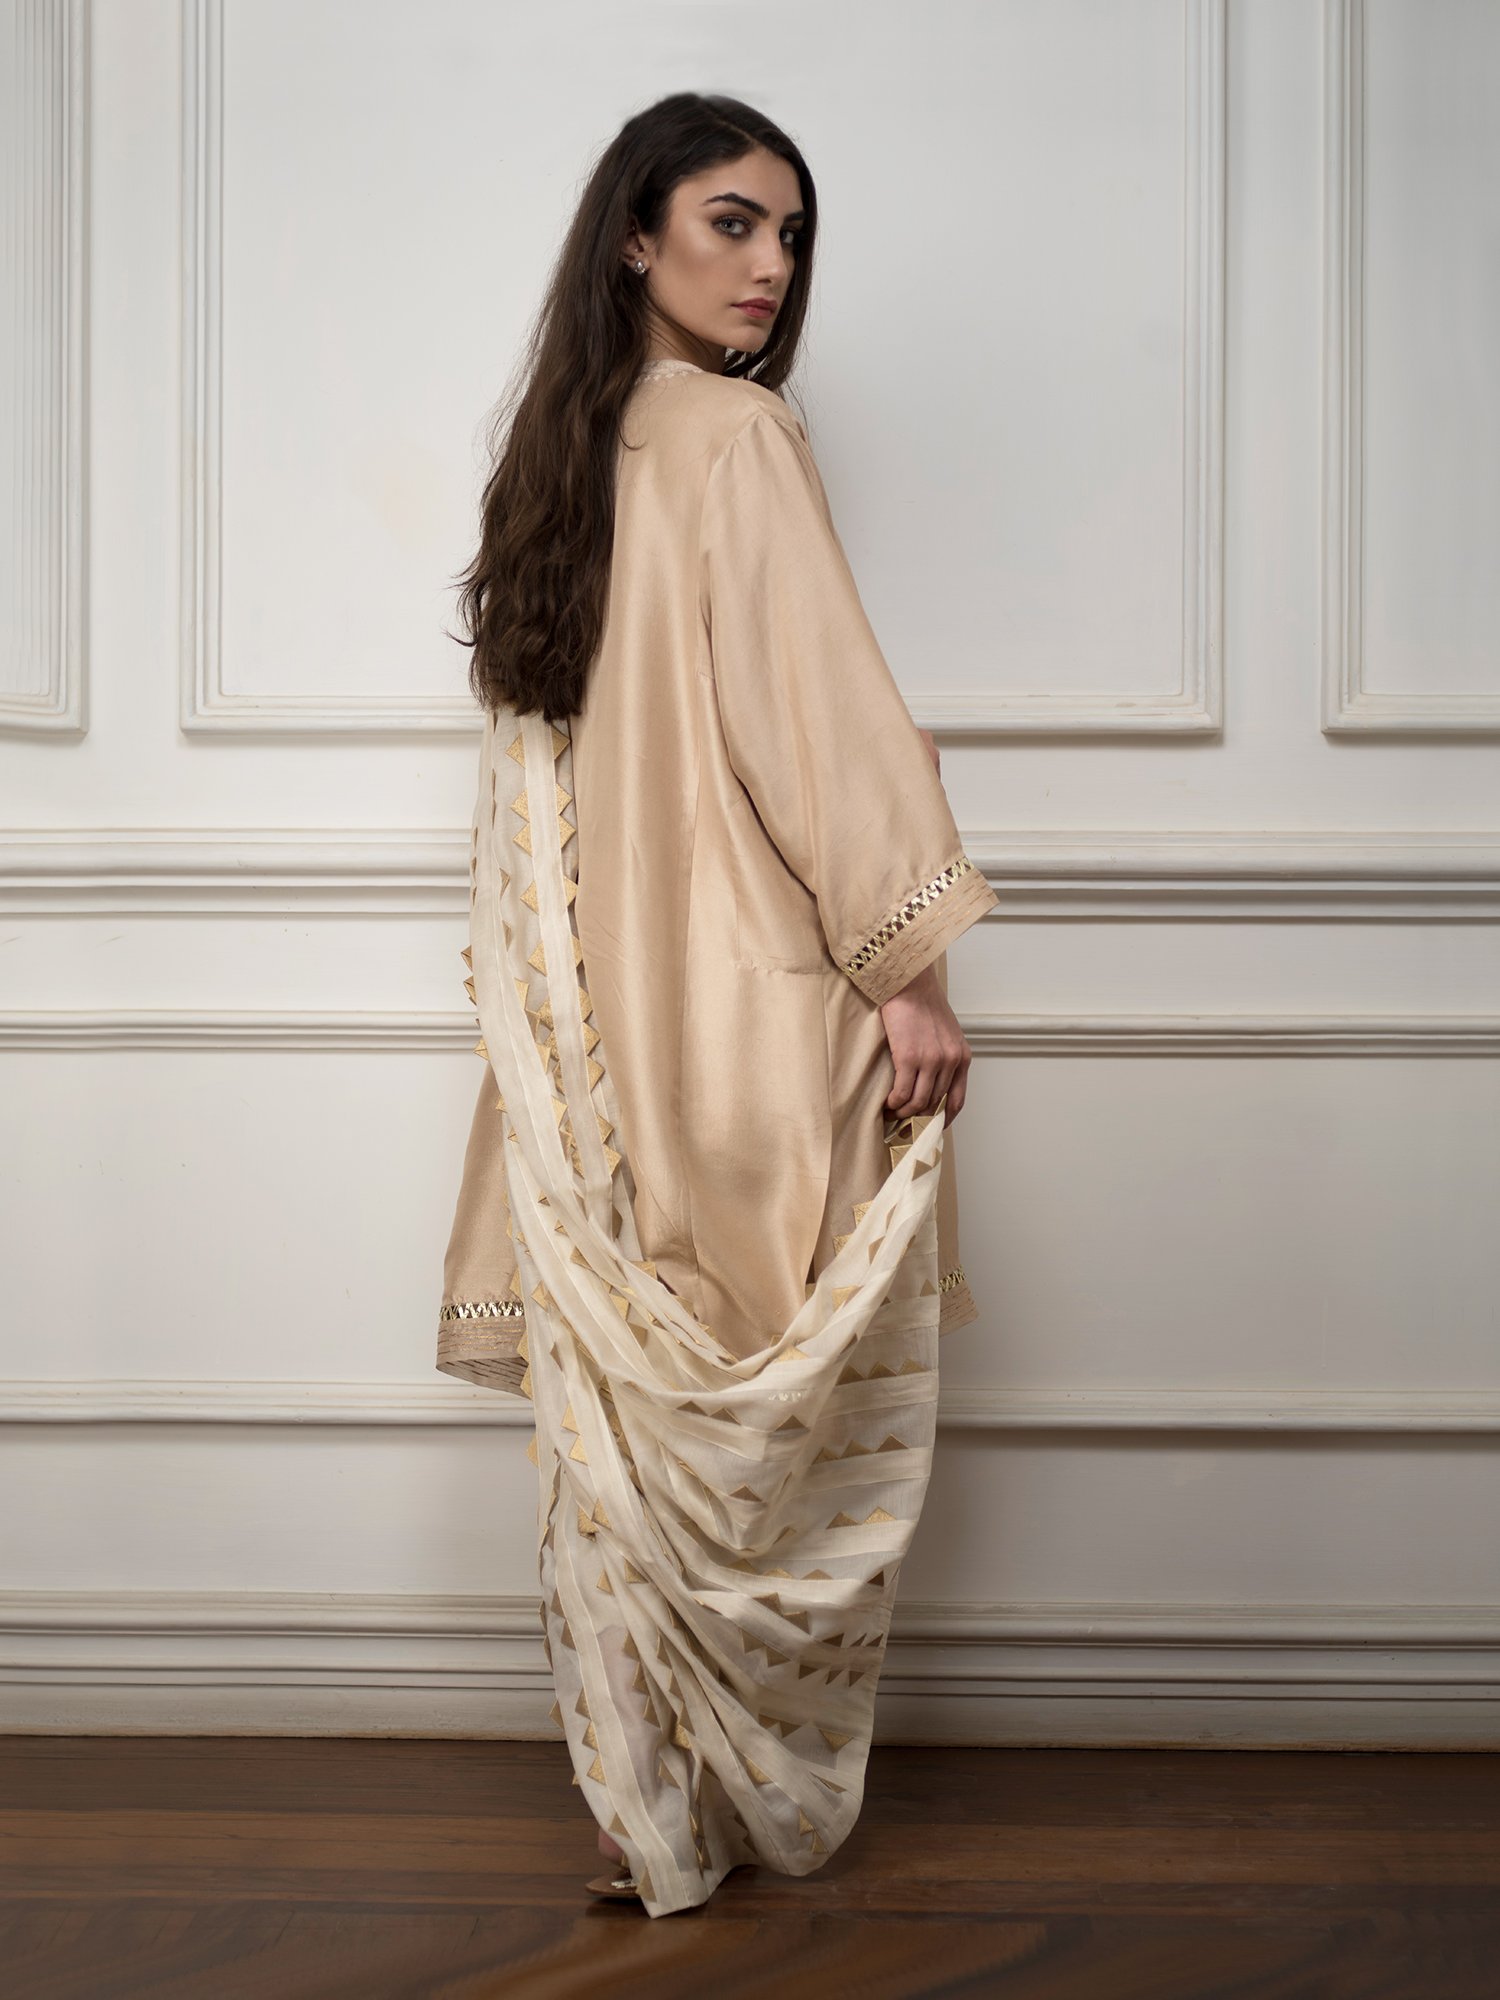 Our Nimr kurti is a relaxed style, cut from weightless silk and handcrafted using traditional embroidery